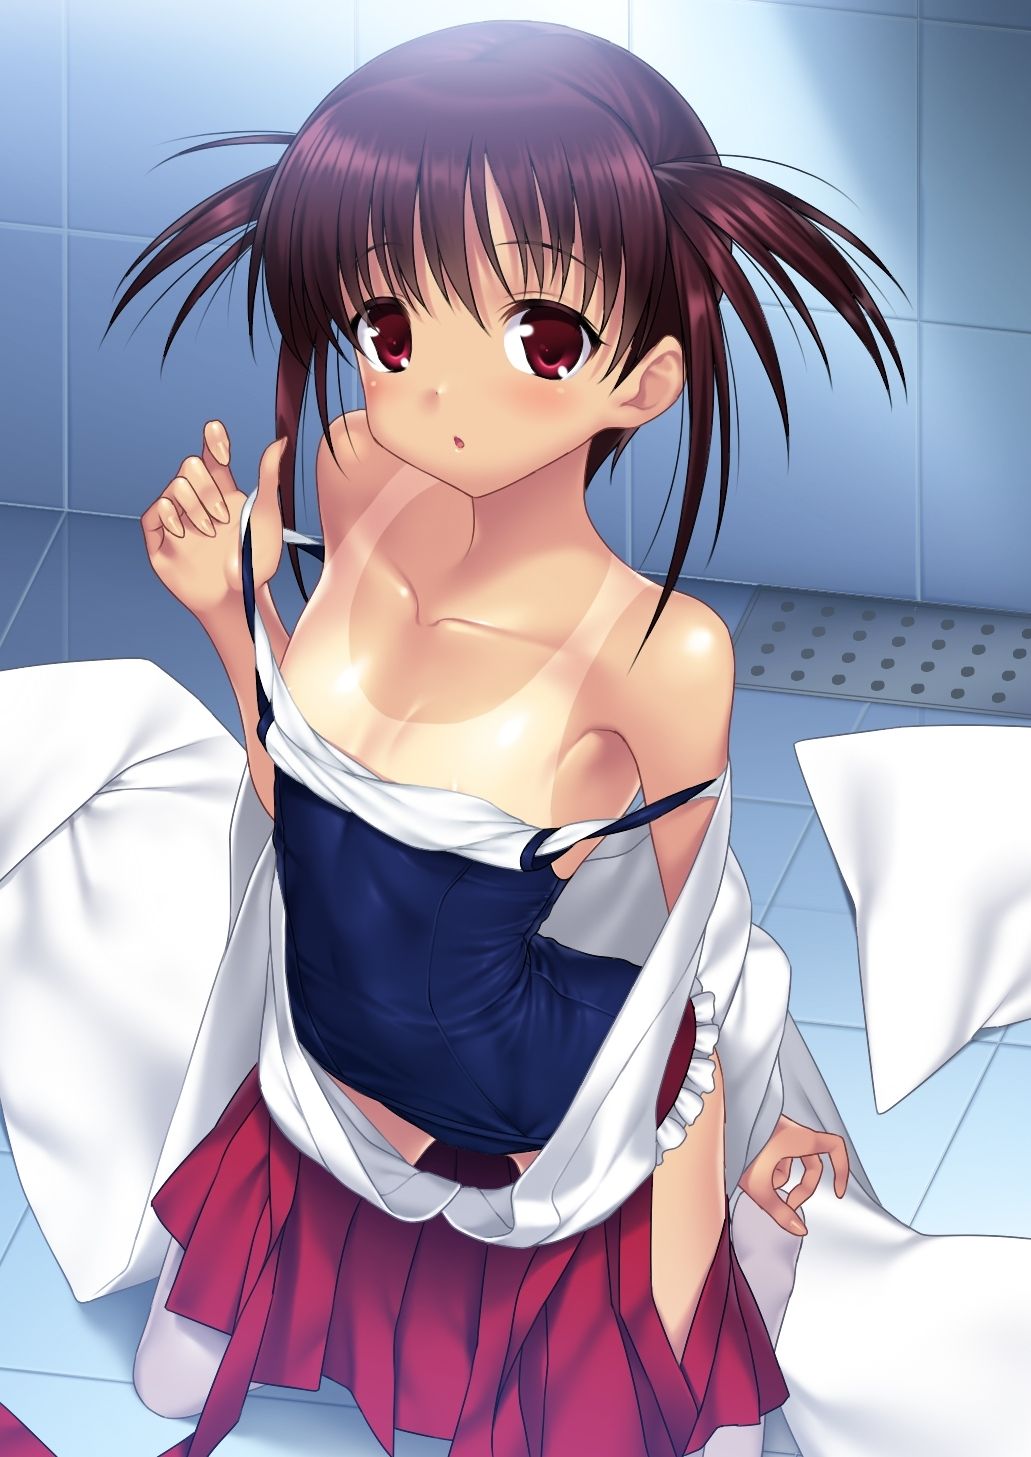 Lucky lewd image that came across a girl changing clothes please 18